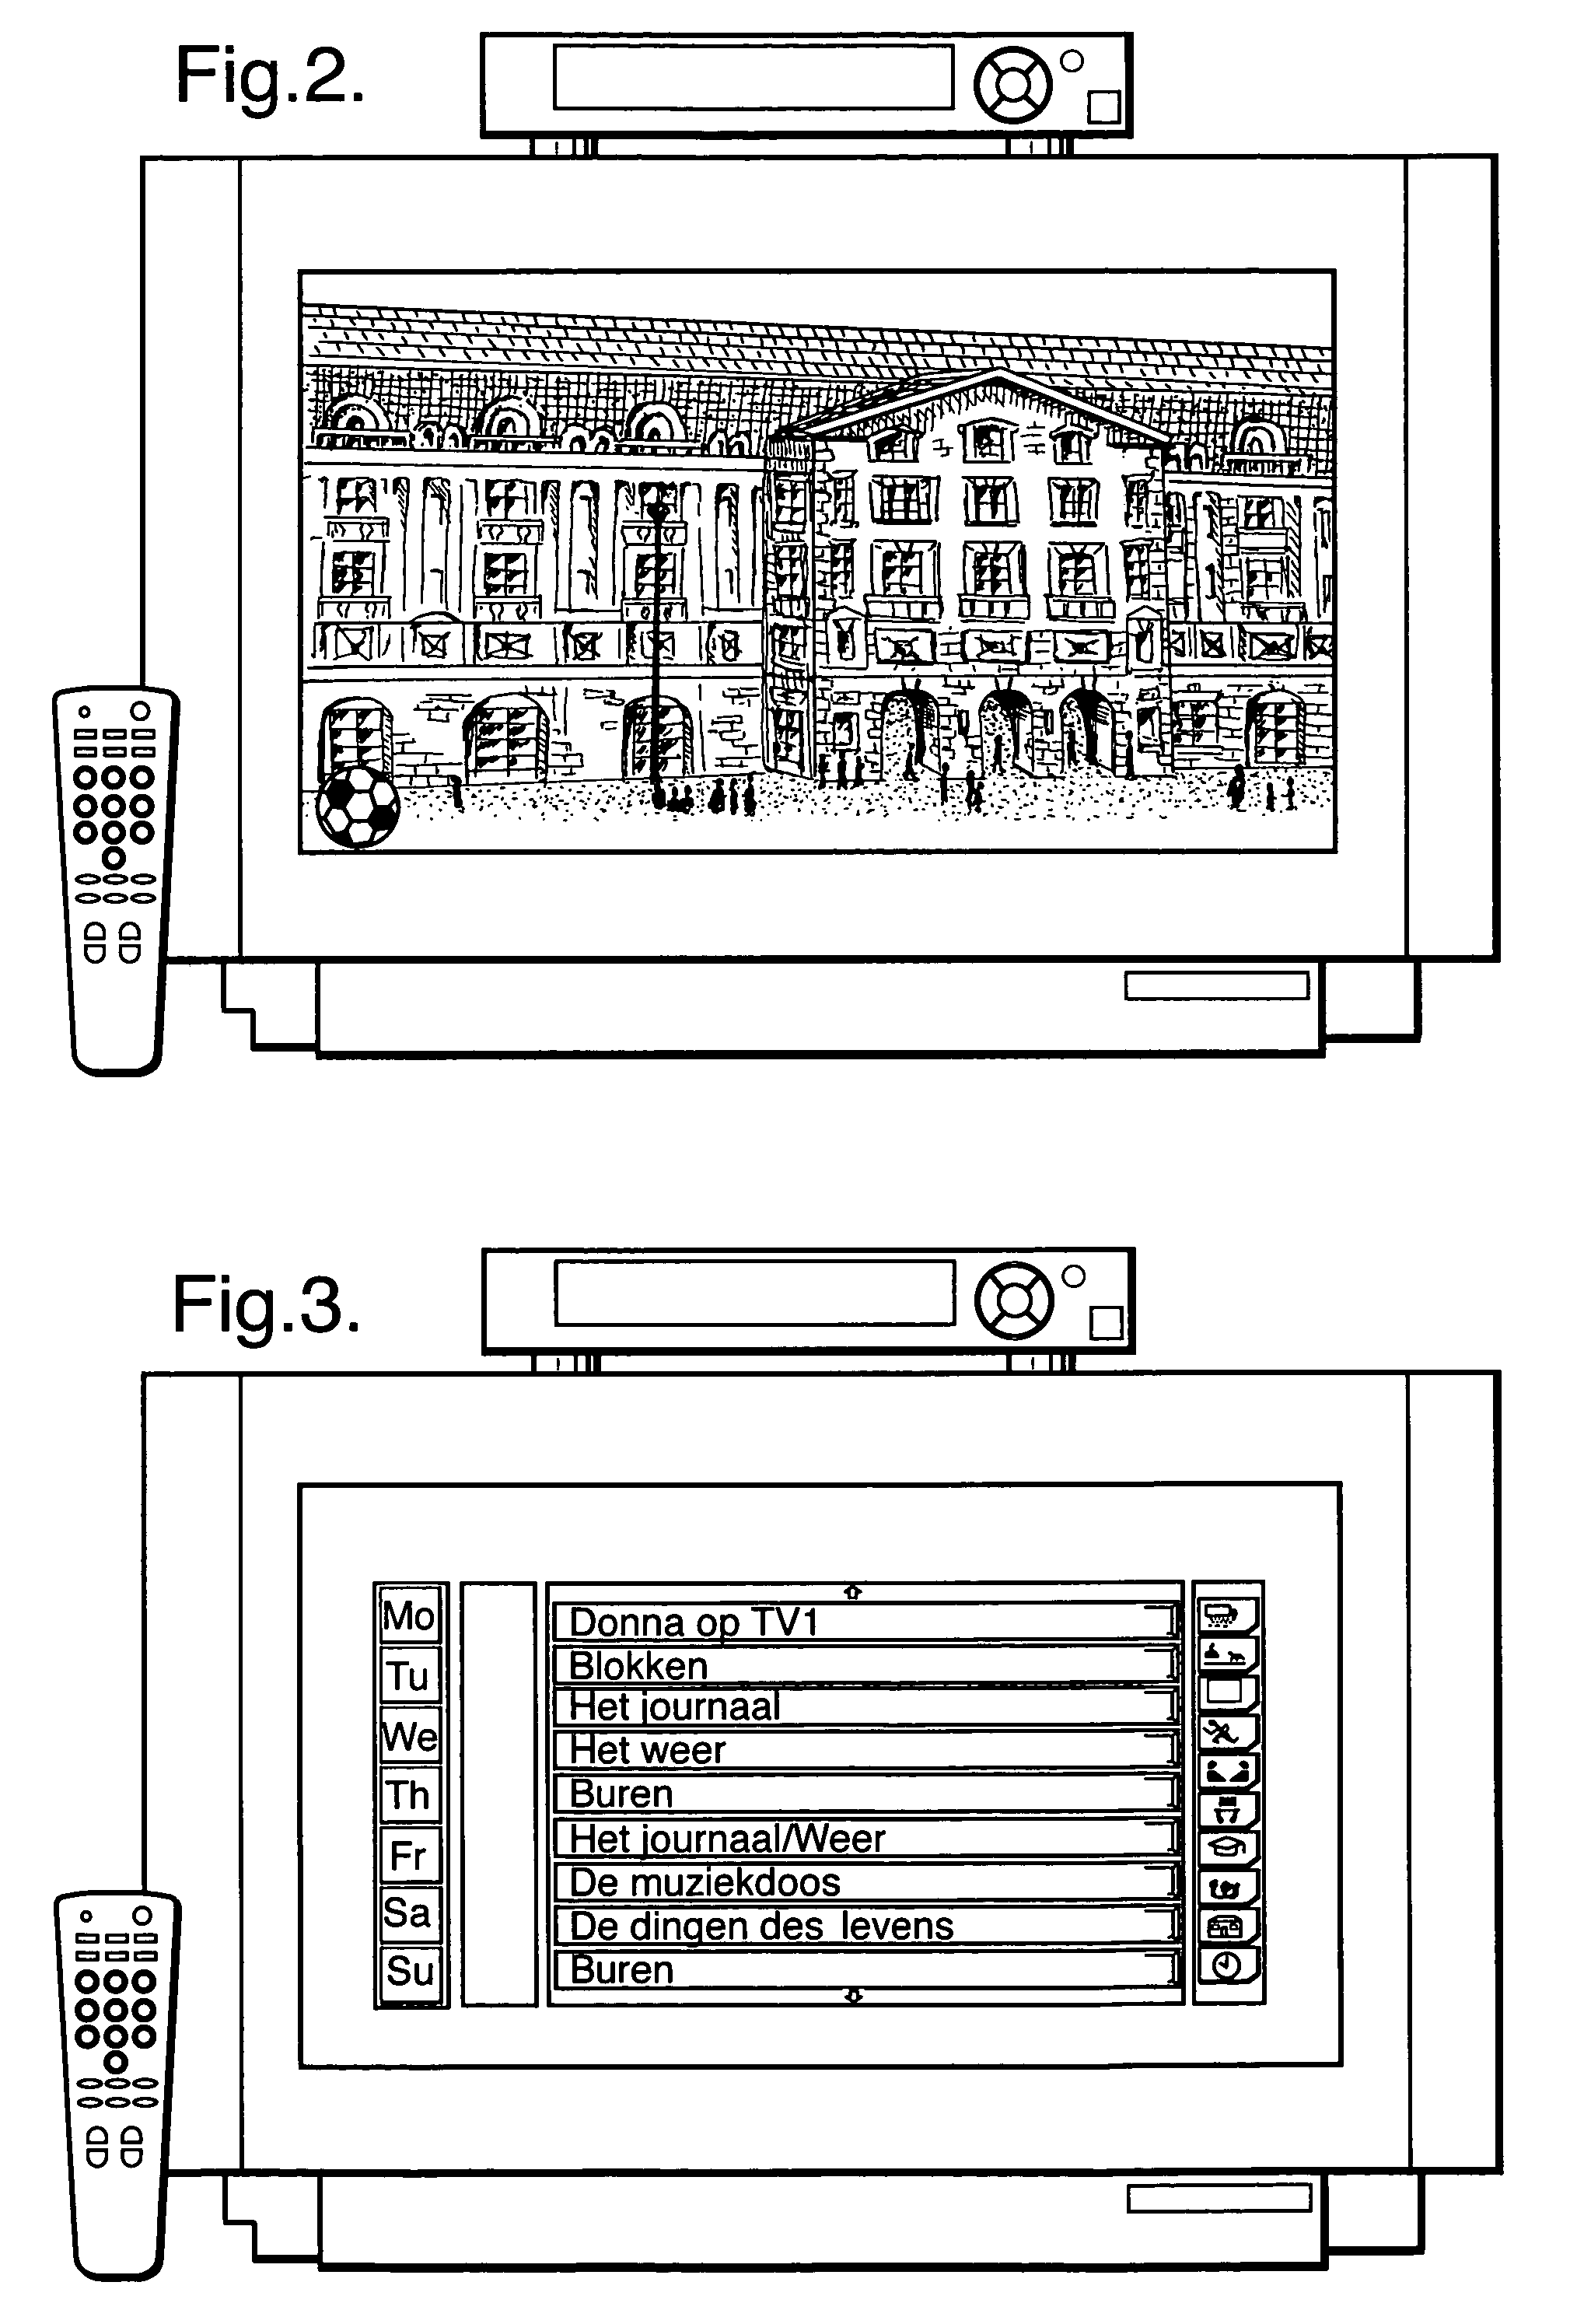 Television display device and method of operating a television system